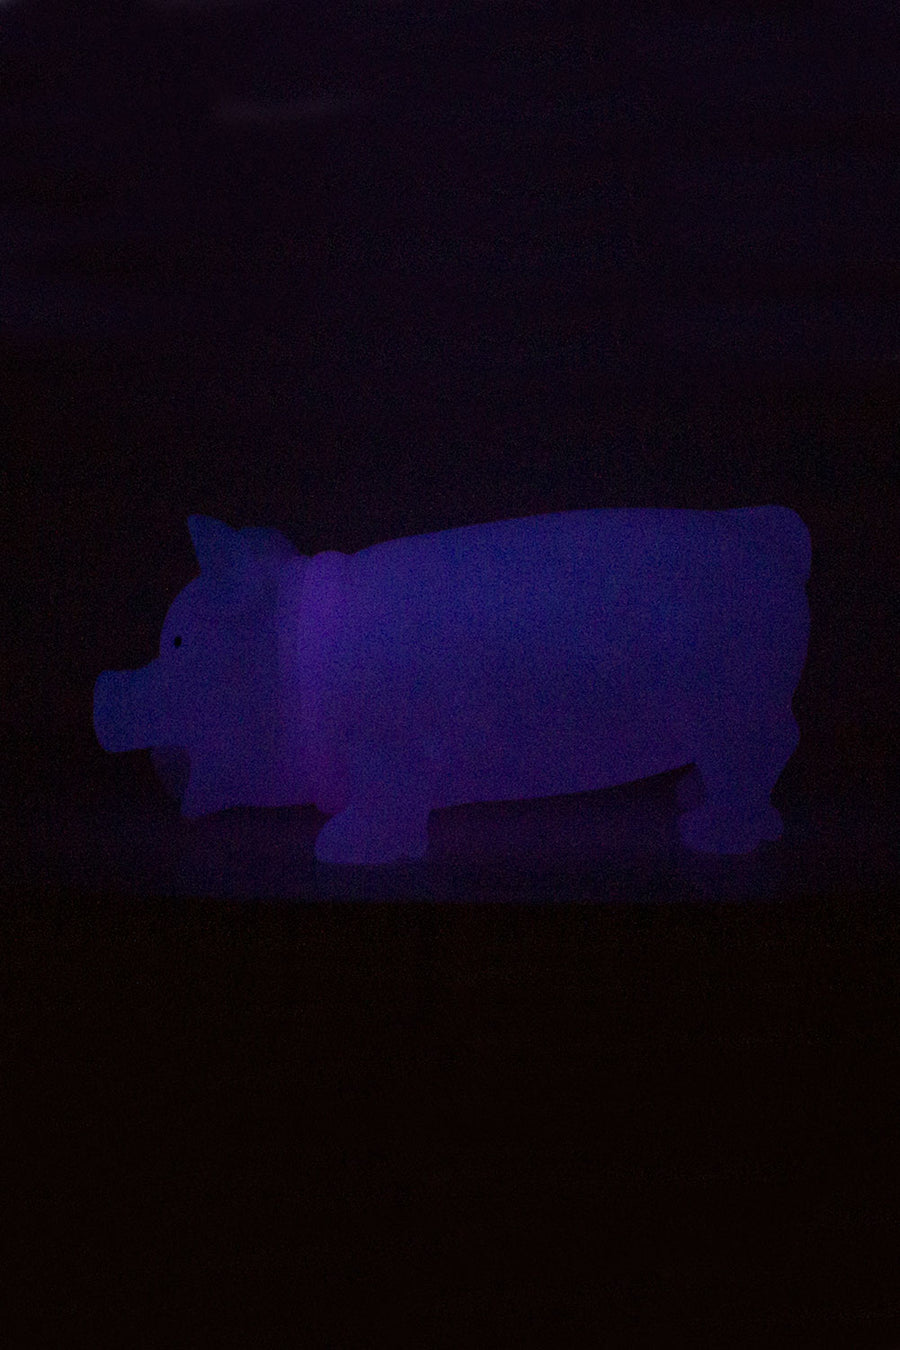 Toy 8-inch Rubber Squealing Pig, Glow In The Dark